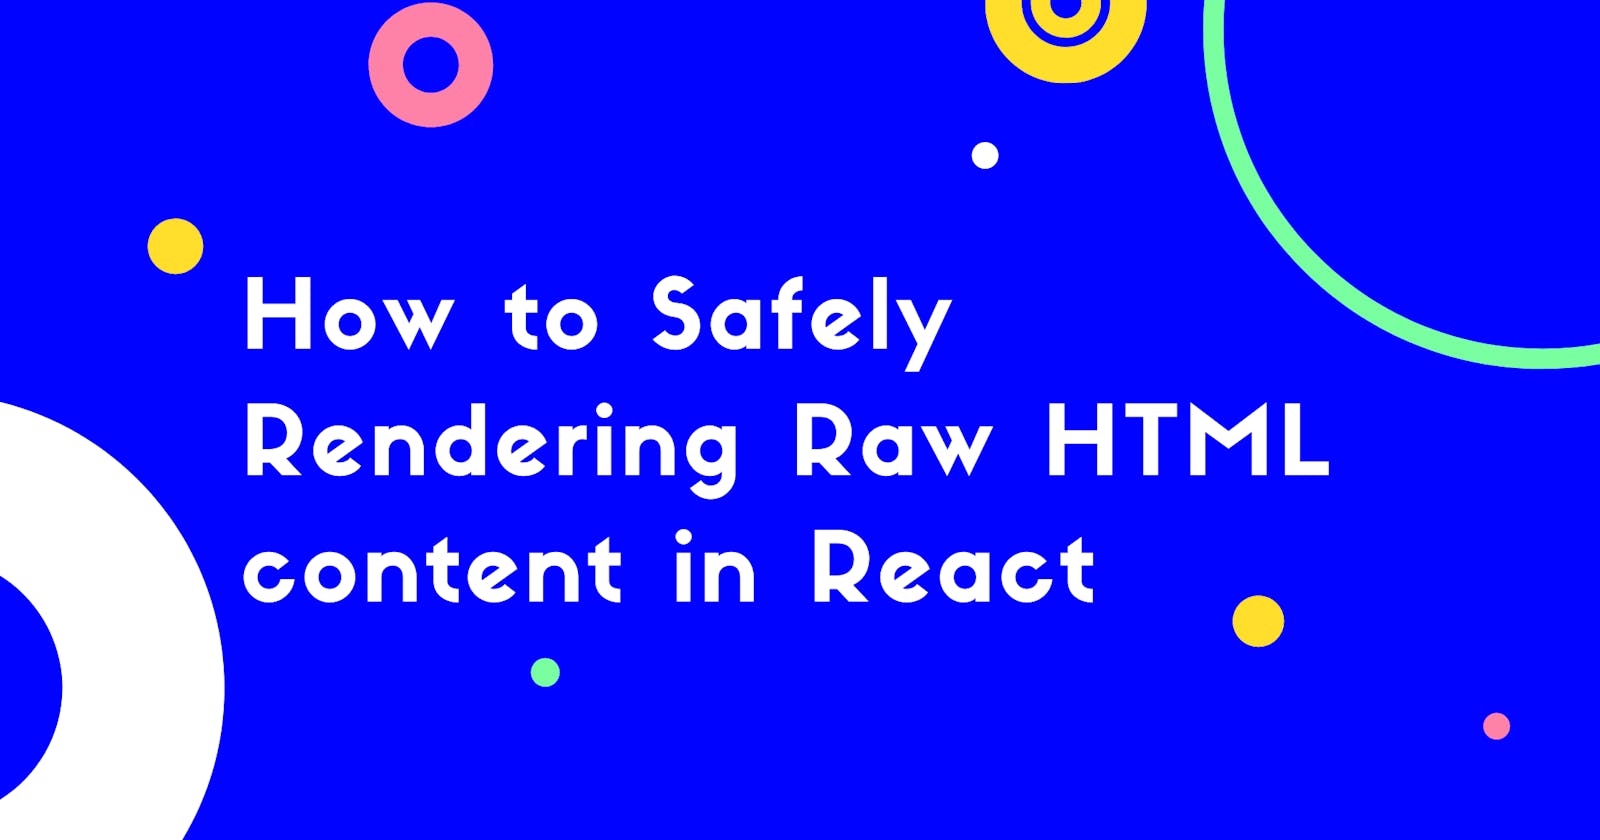 How to safely Rendering Raw HTML content in React